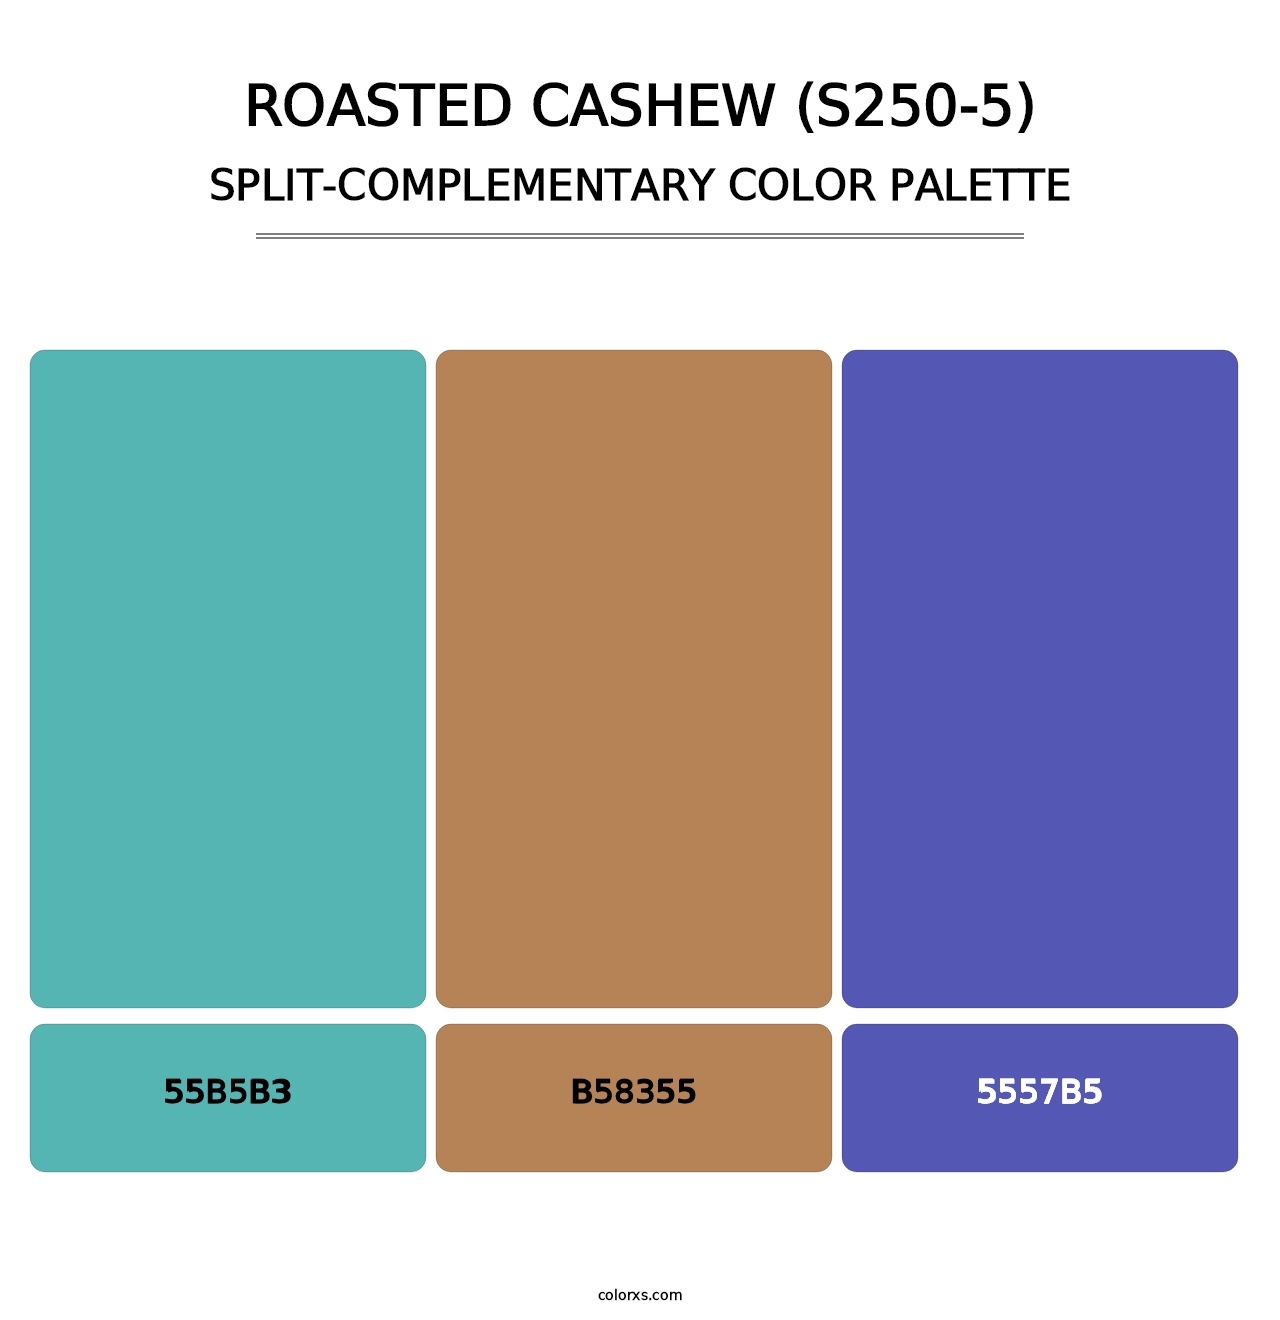 Roasted Cashew (S250-5) - Split-Complementary Color Palette